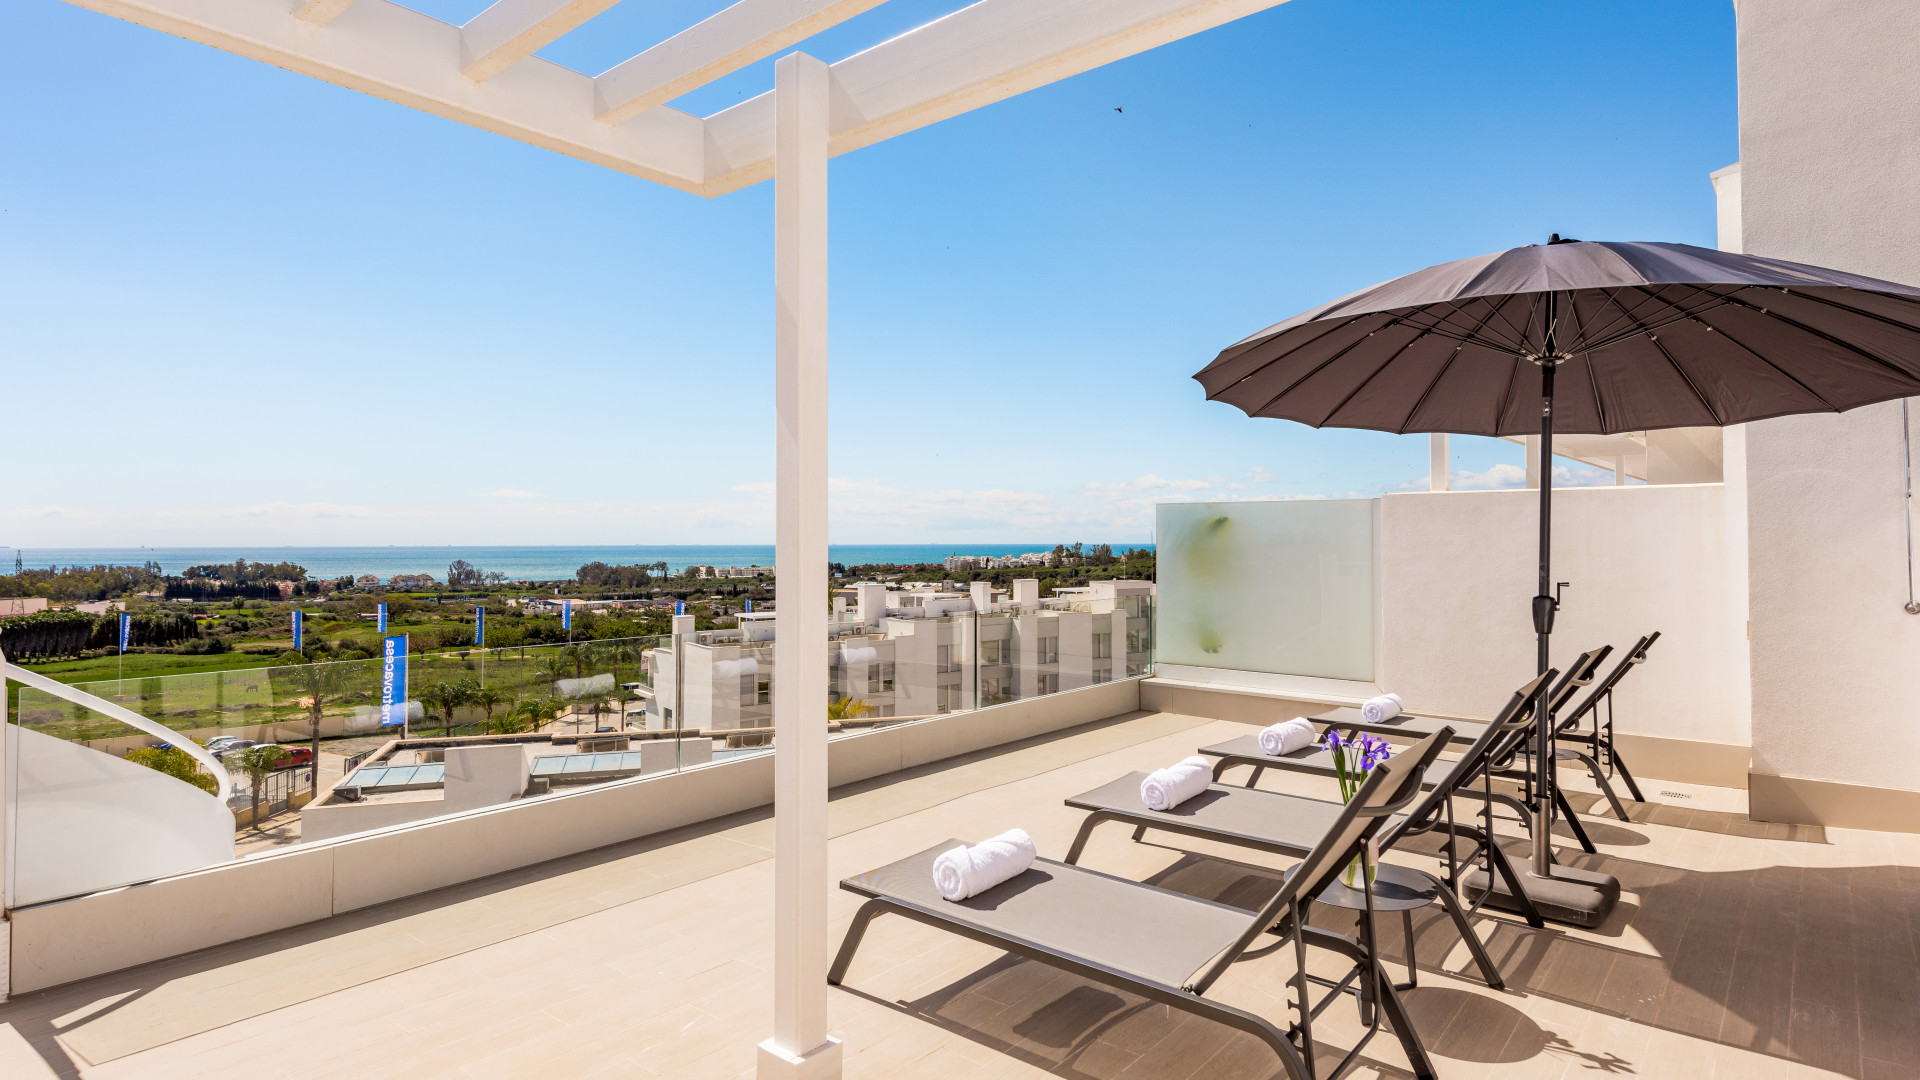 Beautiful 2 bedroom duplex penthouse with spectacular sea views in Cancelada